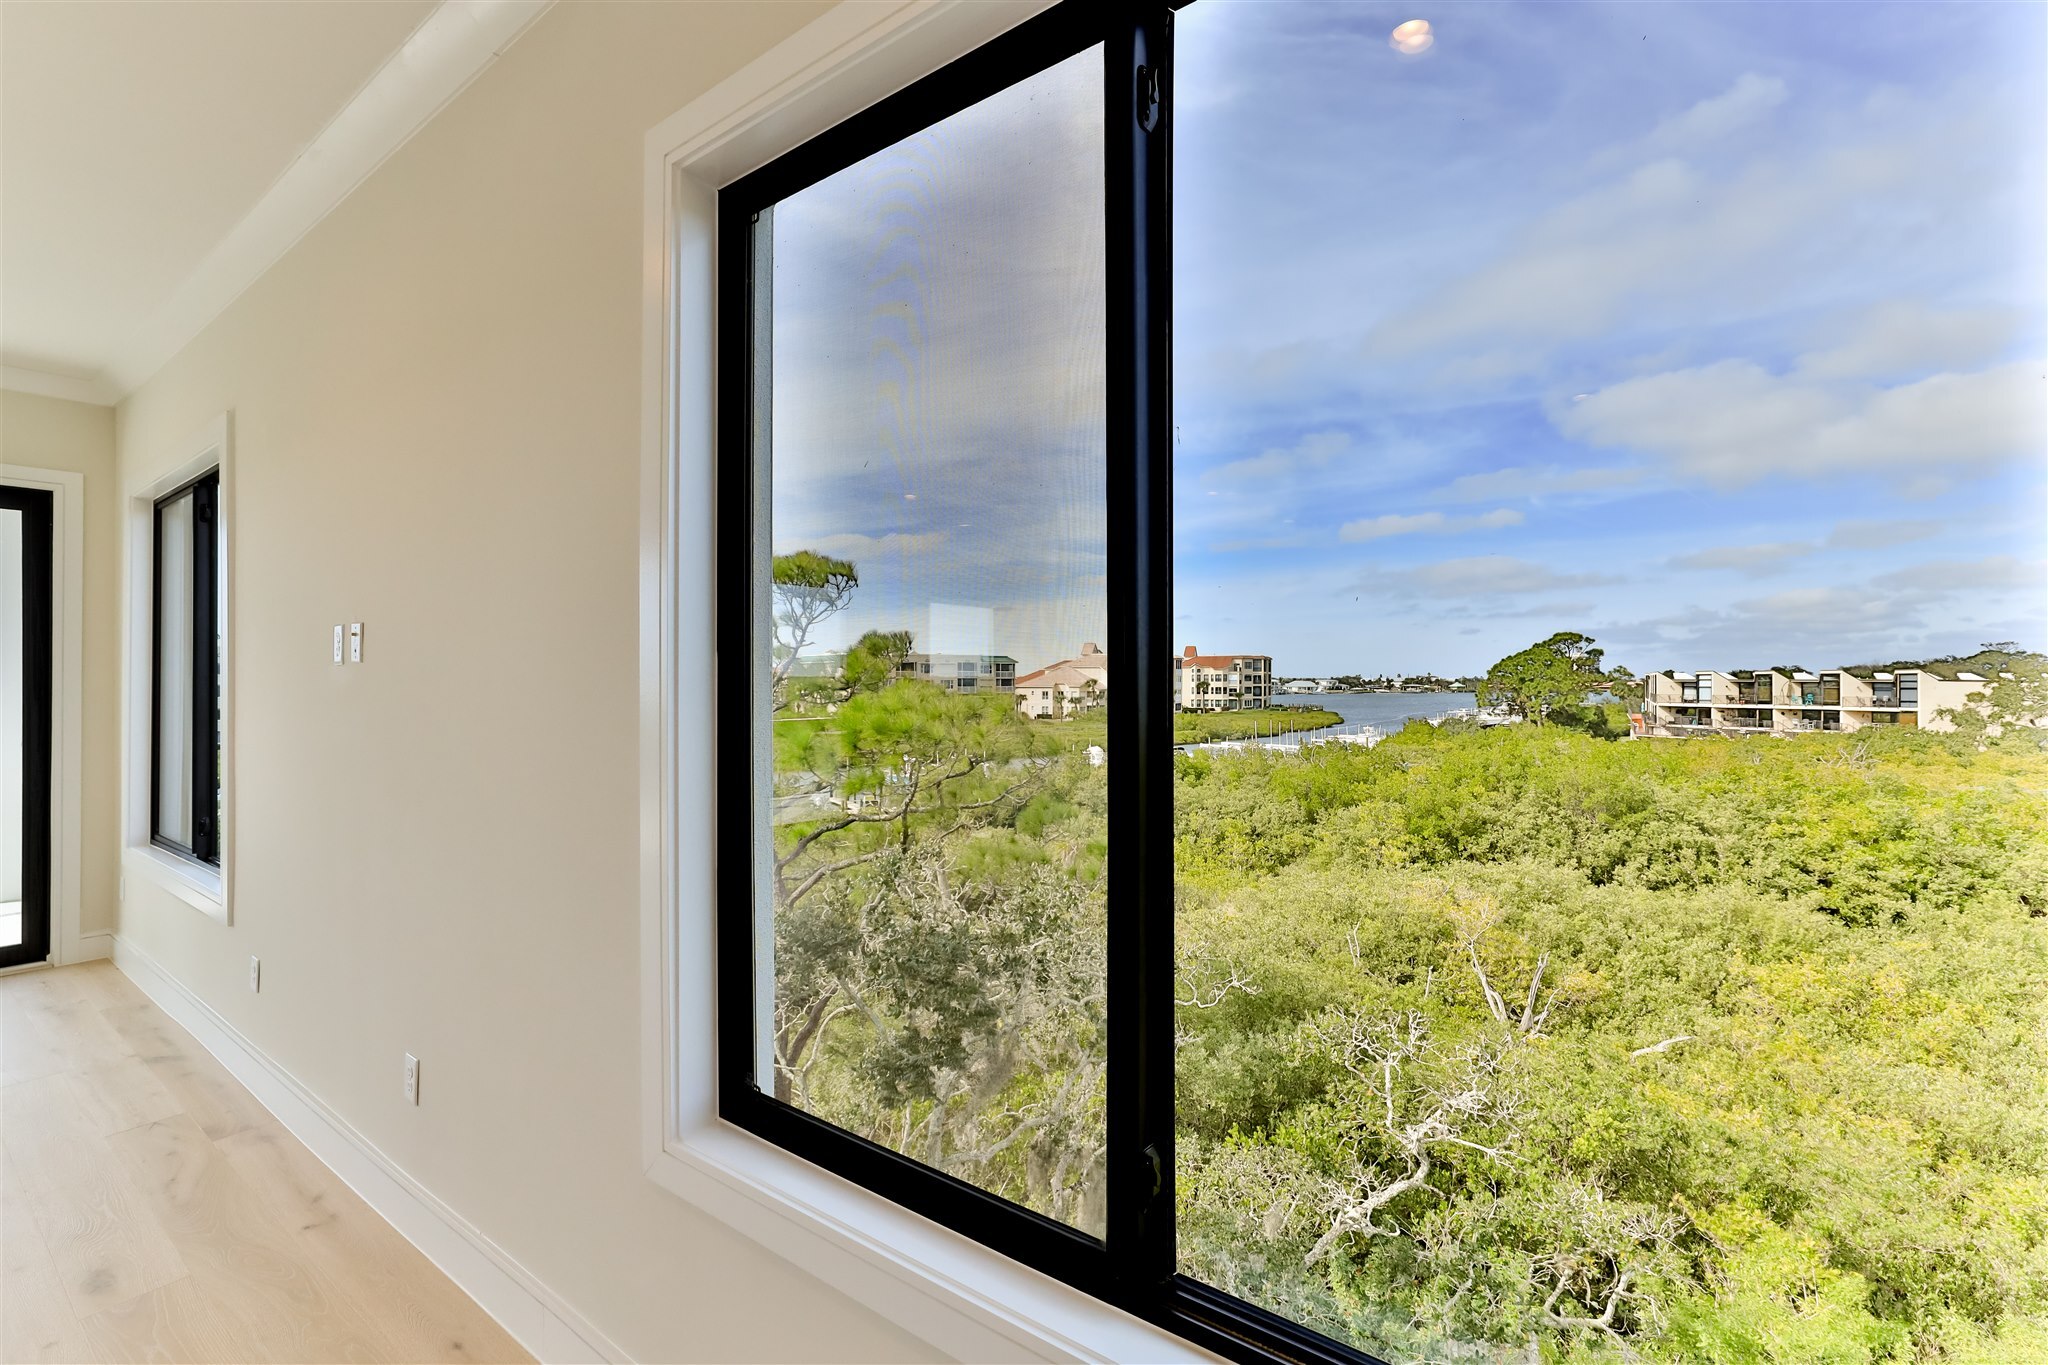 552 S Peninsula also for sale with a different color scheme and view. CHECK IT OUT!